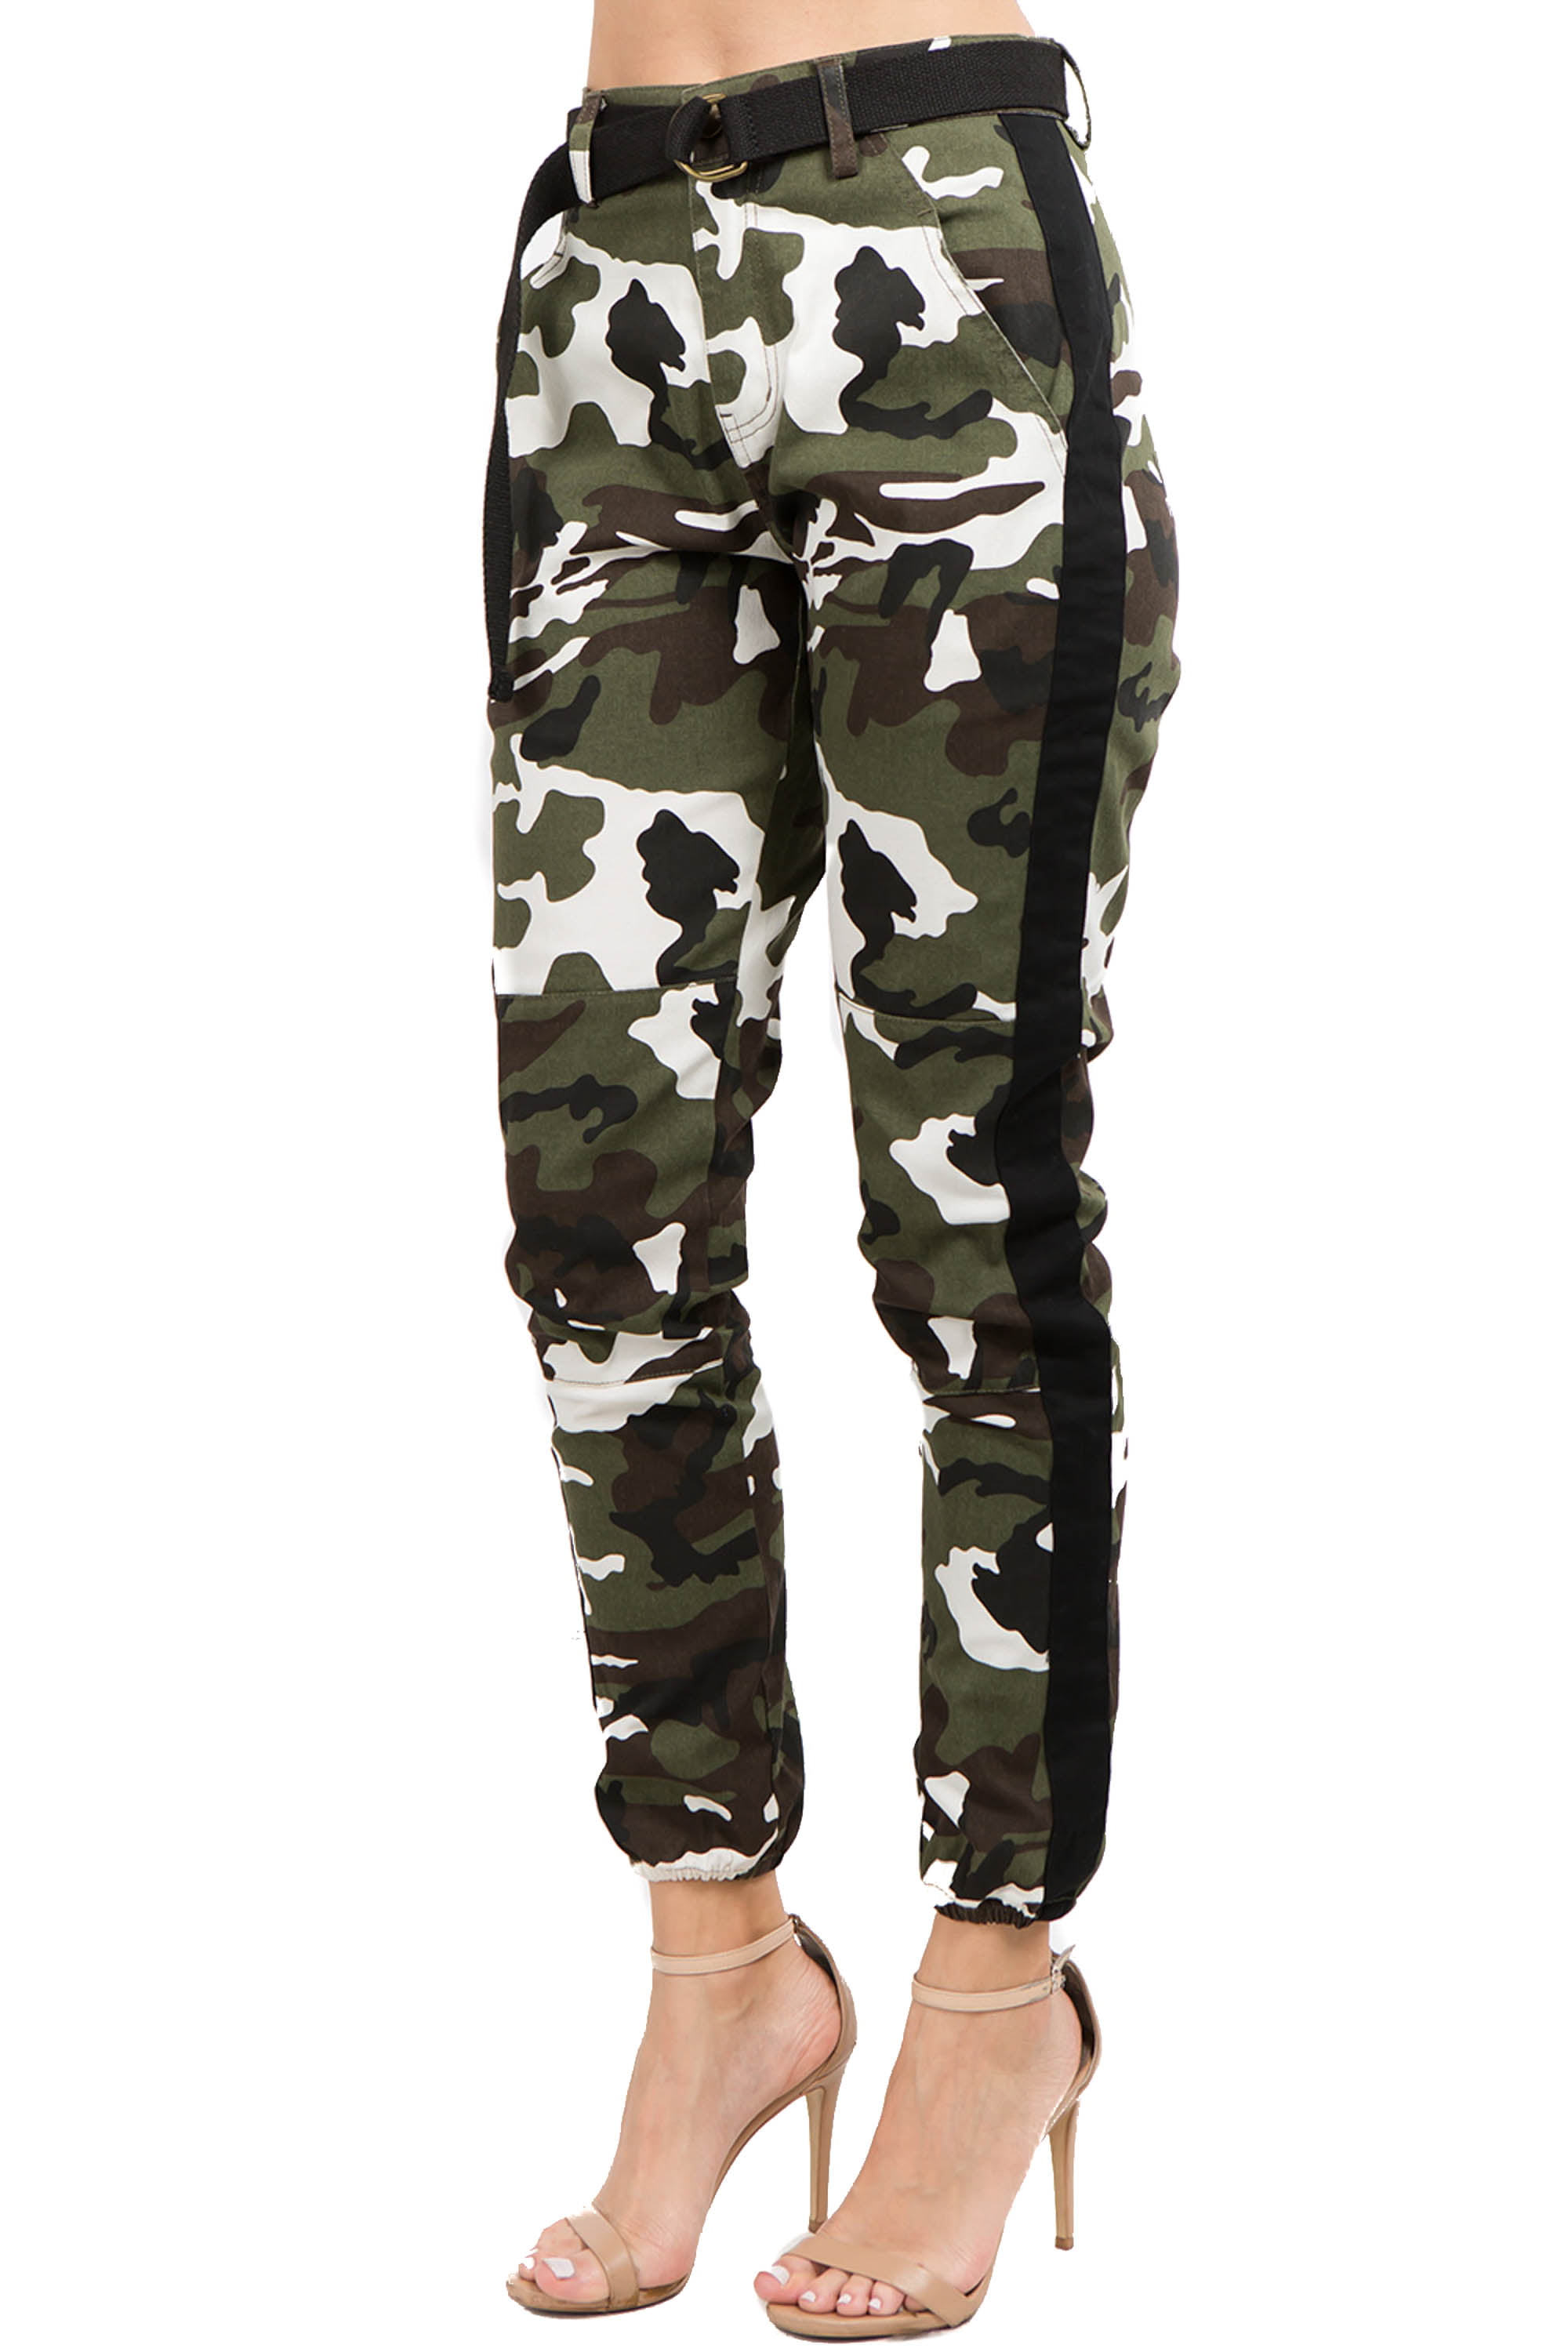 Love Moda Women's Slim Fit Camouflage Cotton Belted Jogger Pants ...